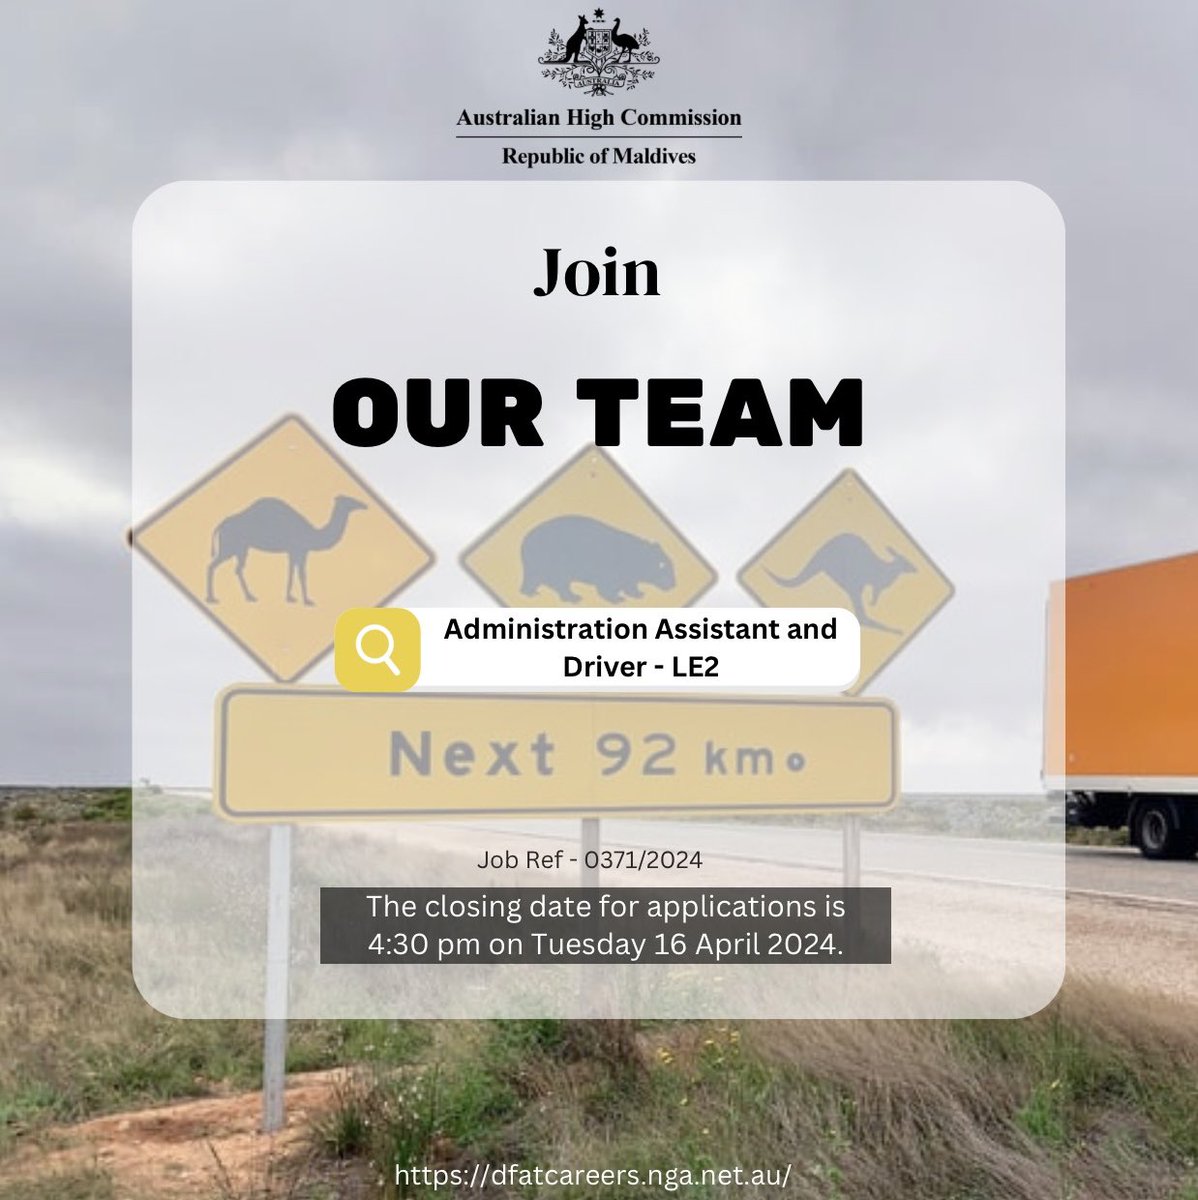 📢 Join our team! The High Commission is looking for an Administration Assistant and Driver - LE2 (Job Ref – 0371/2024) Applications close at 4:30 pm, Tuesday 16 April 2024. Follow the link below to apply👇 tinyurl.com/3t5aaxnz